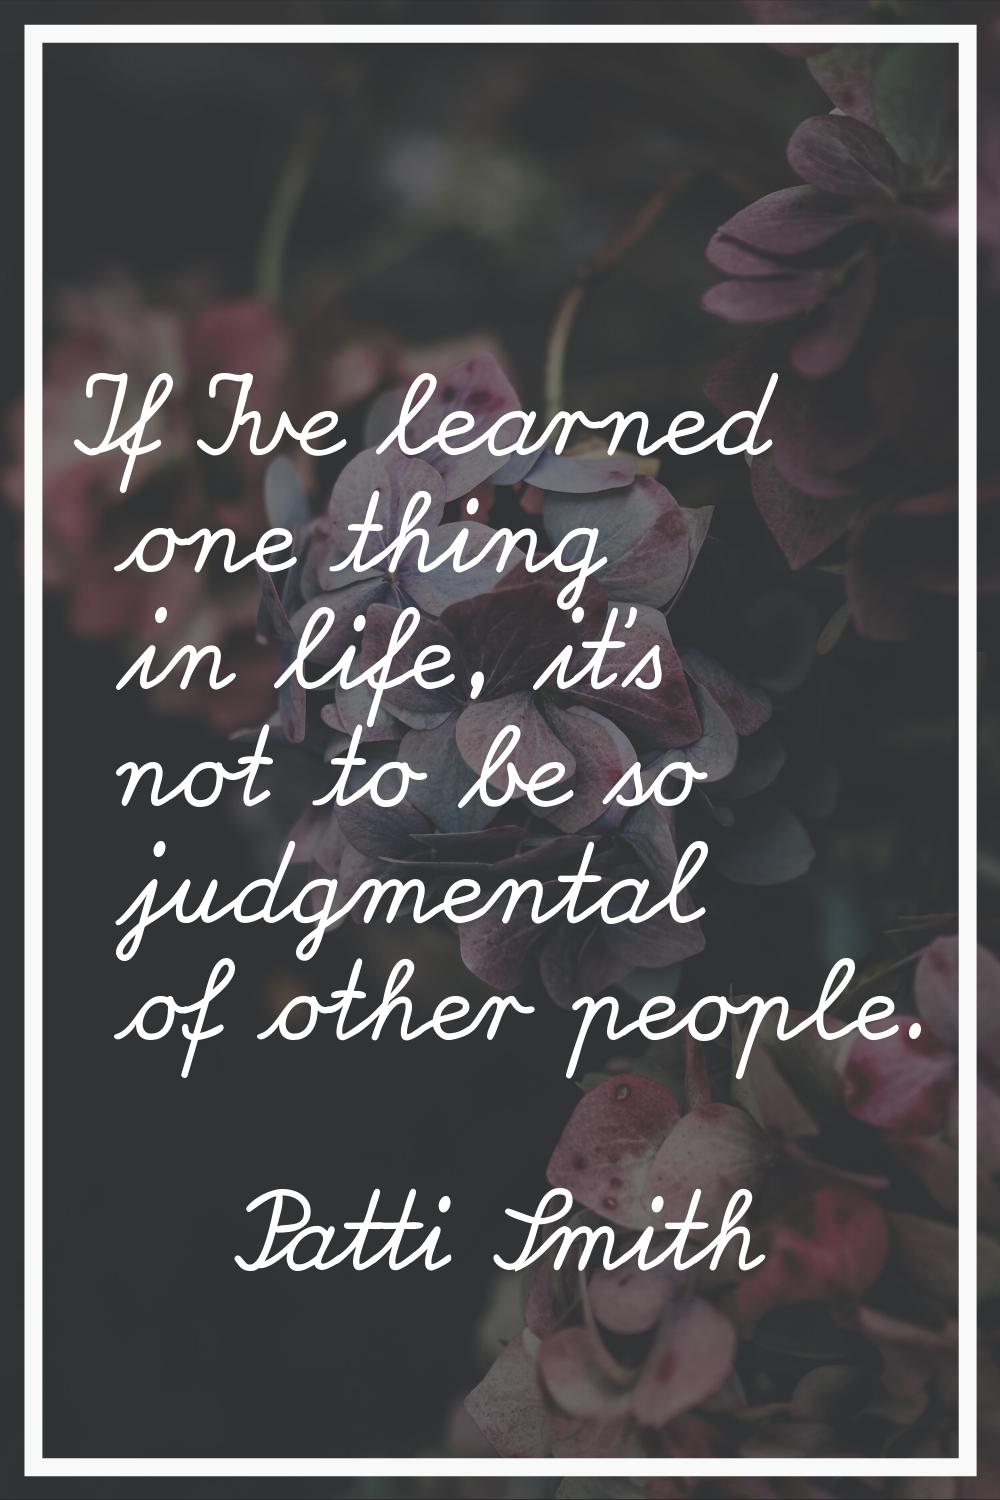 If I've learned one thing in life, it's not to be so judgmental of other people.